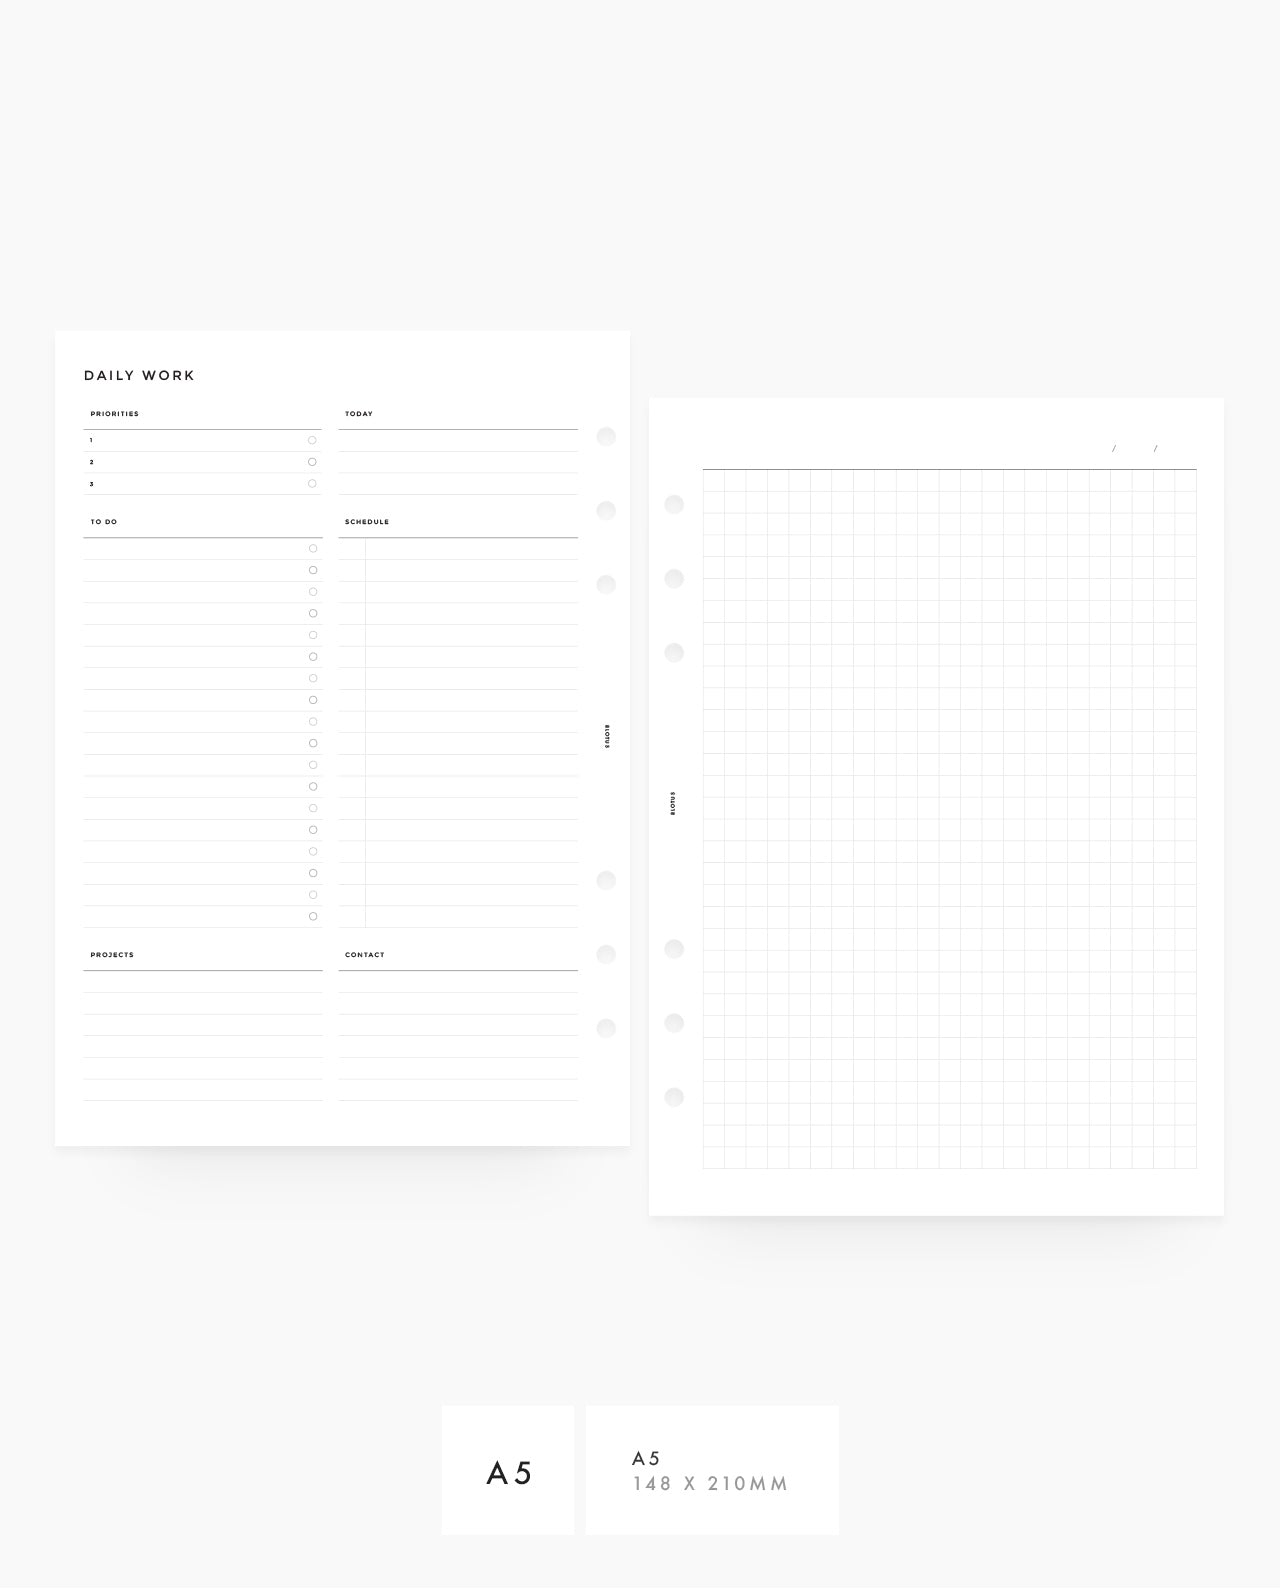 The Best Tools for your Planner — Acorns & Oaks